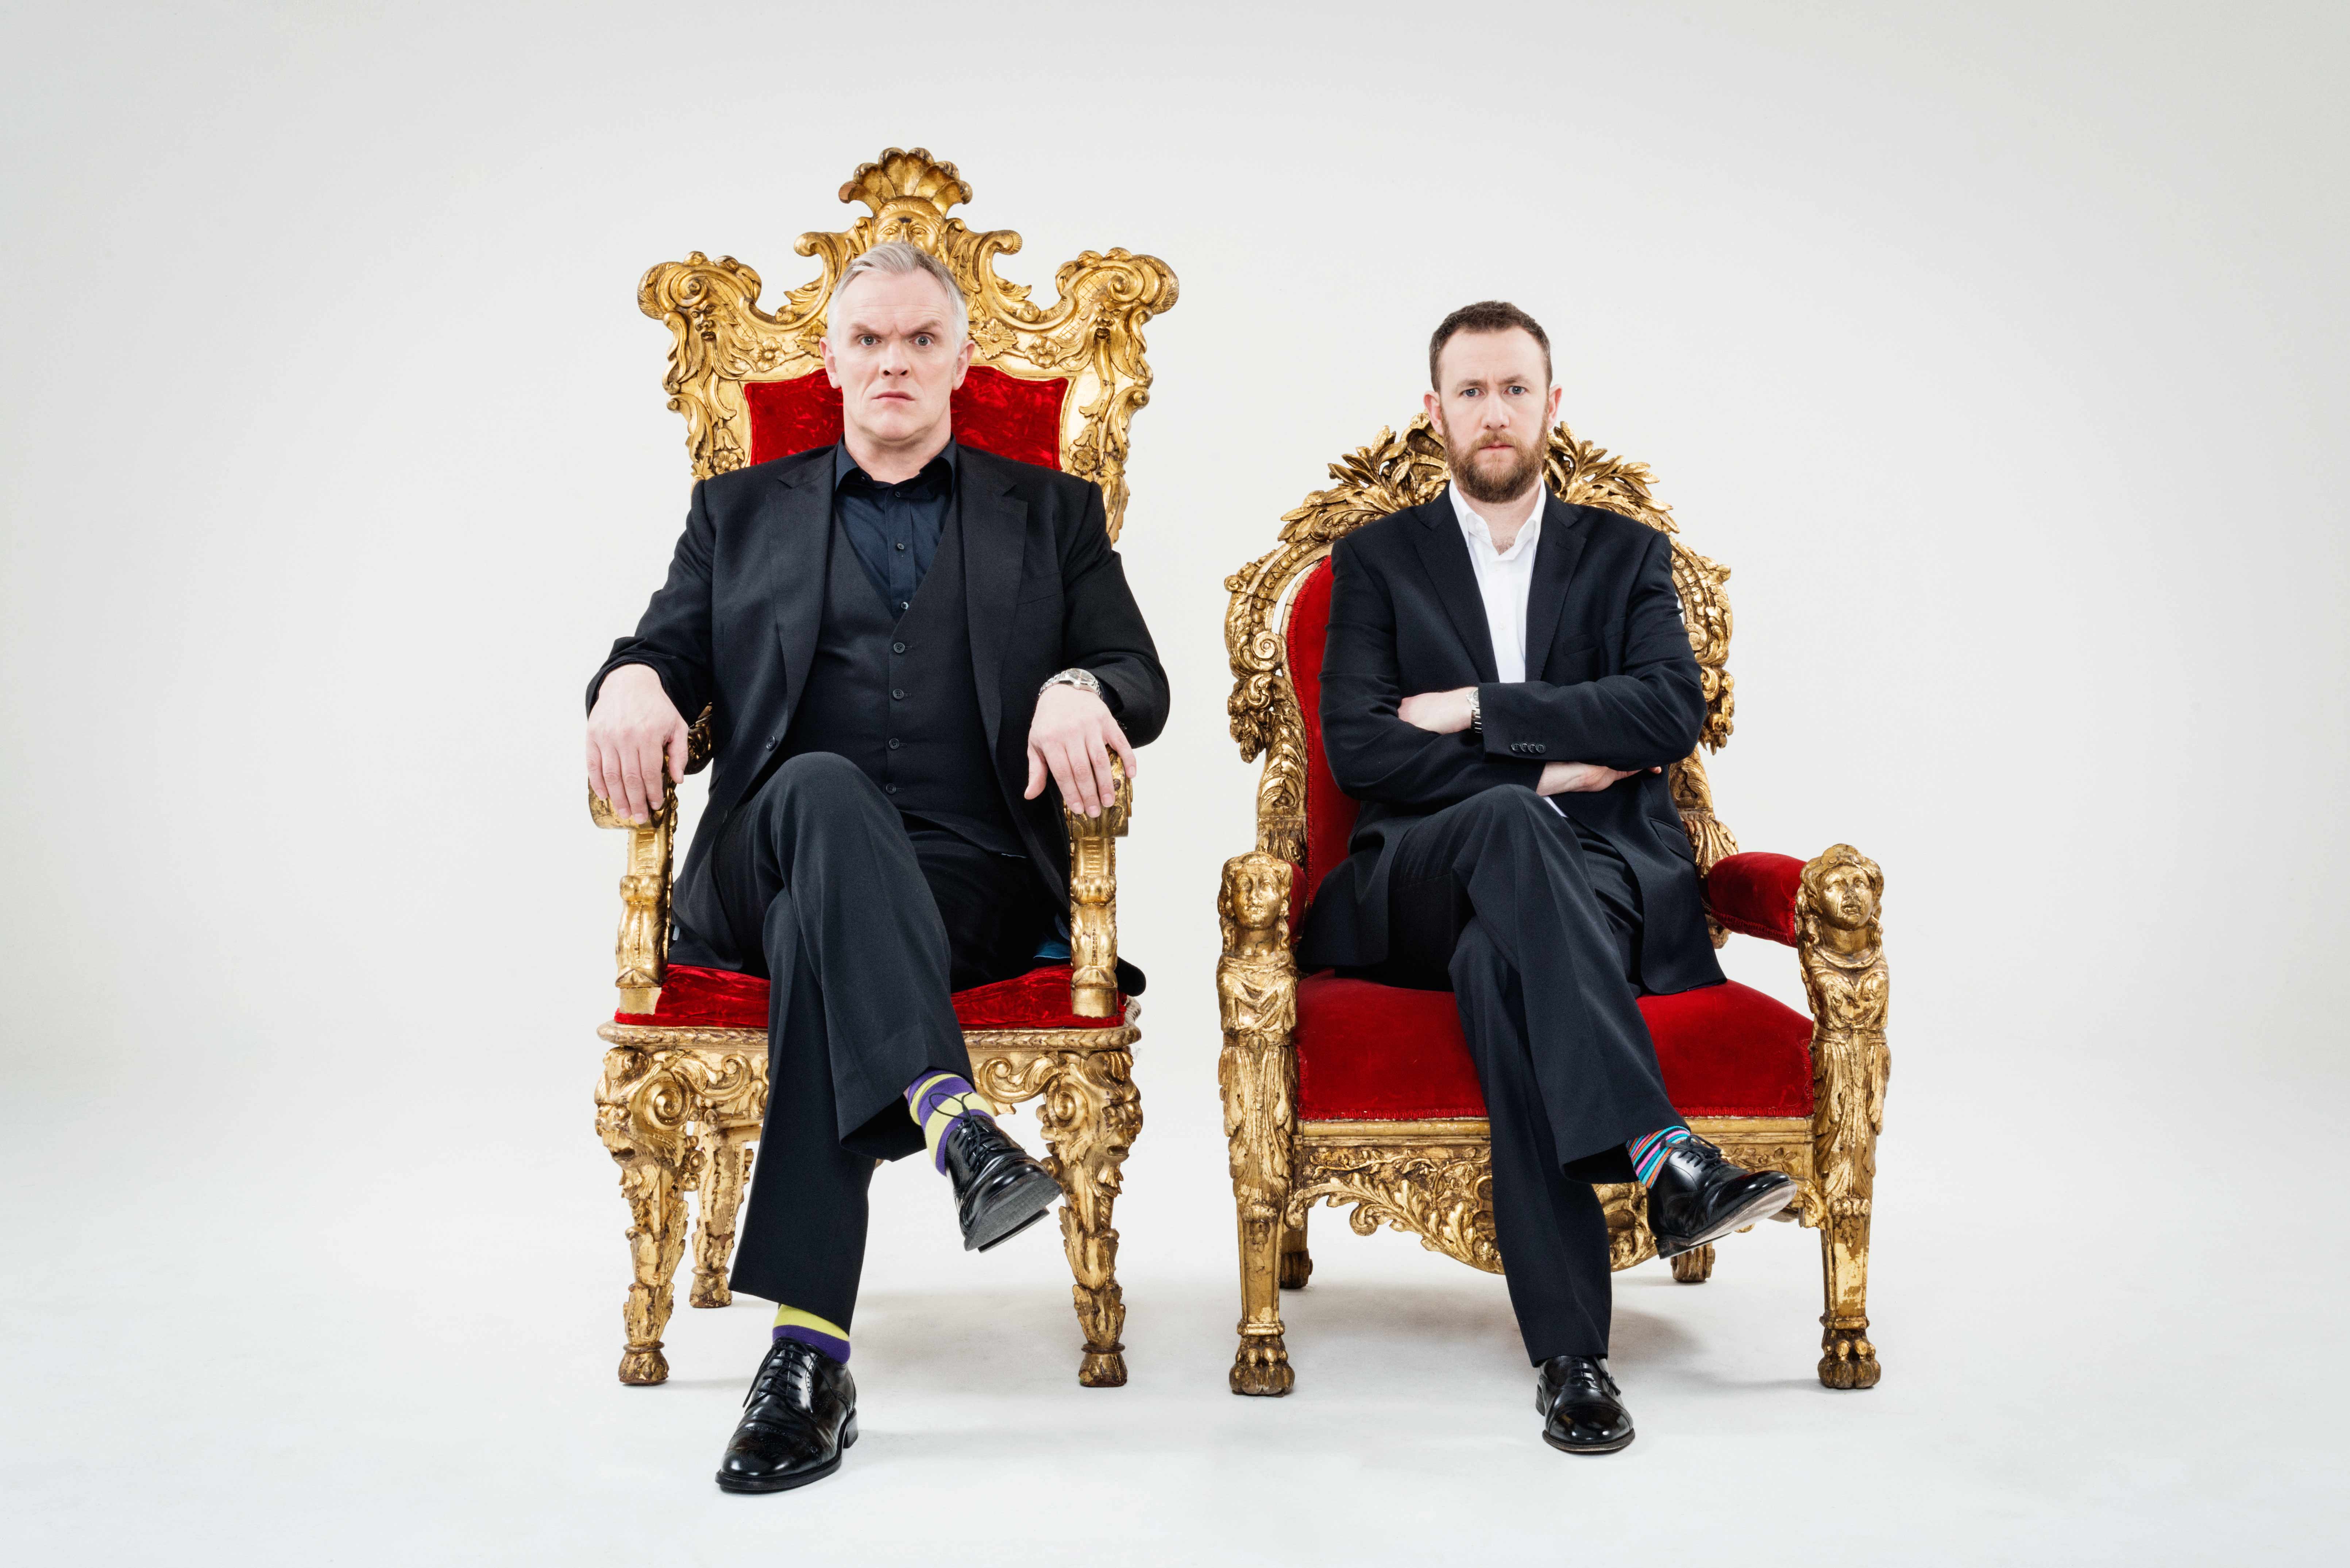 TASKMASTER LAUNCHES INTERNATIONALLY WITH SALES IN FOUR NEW TERRITORIES